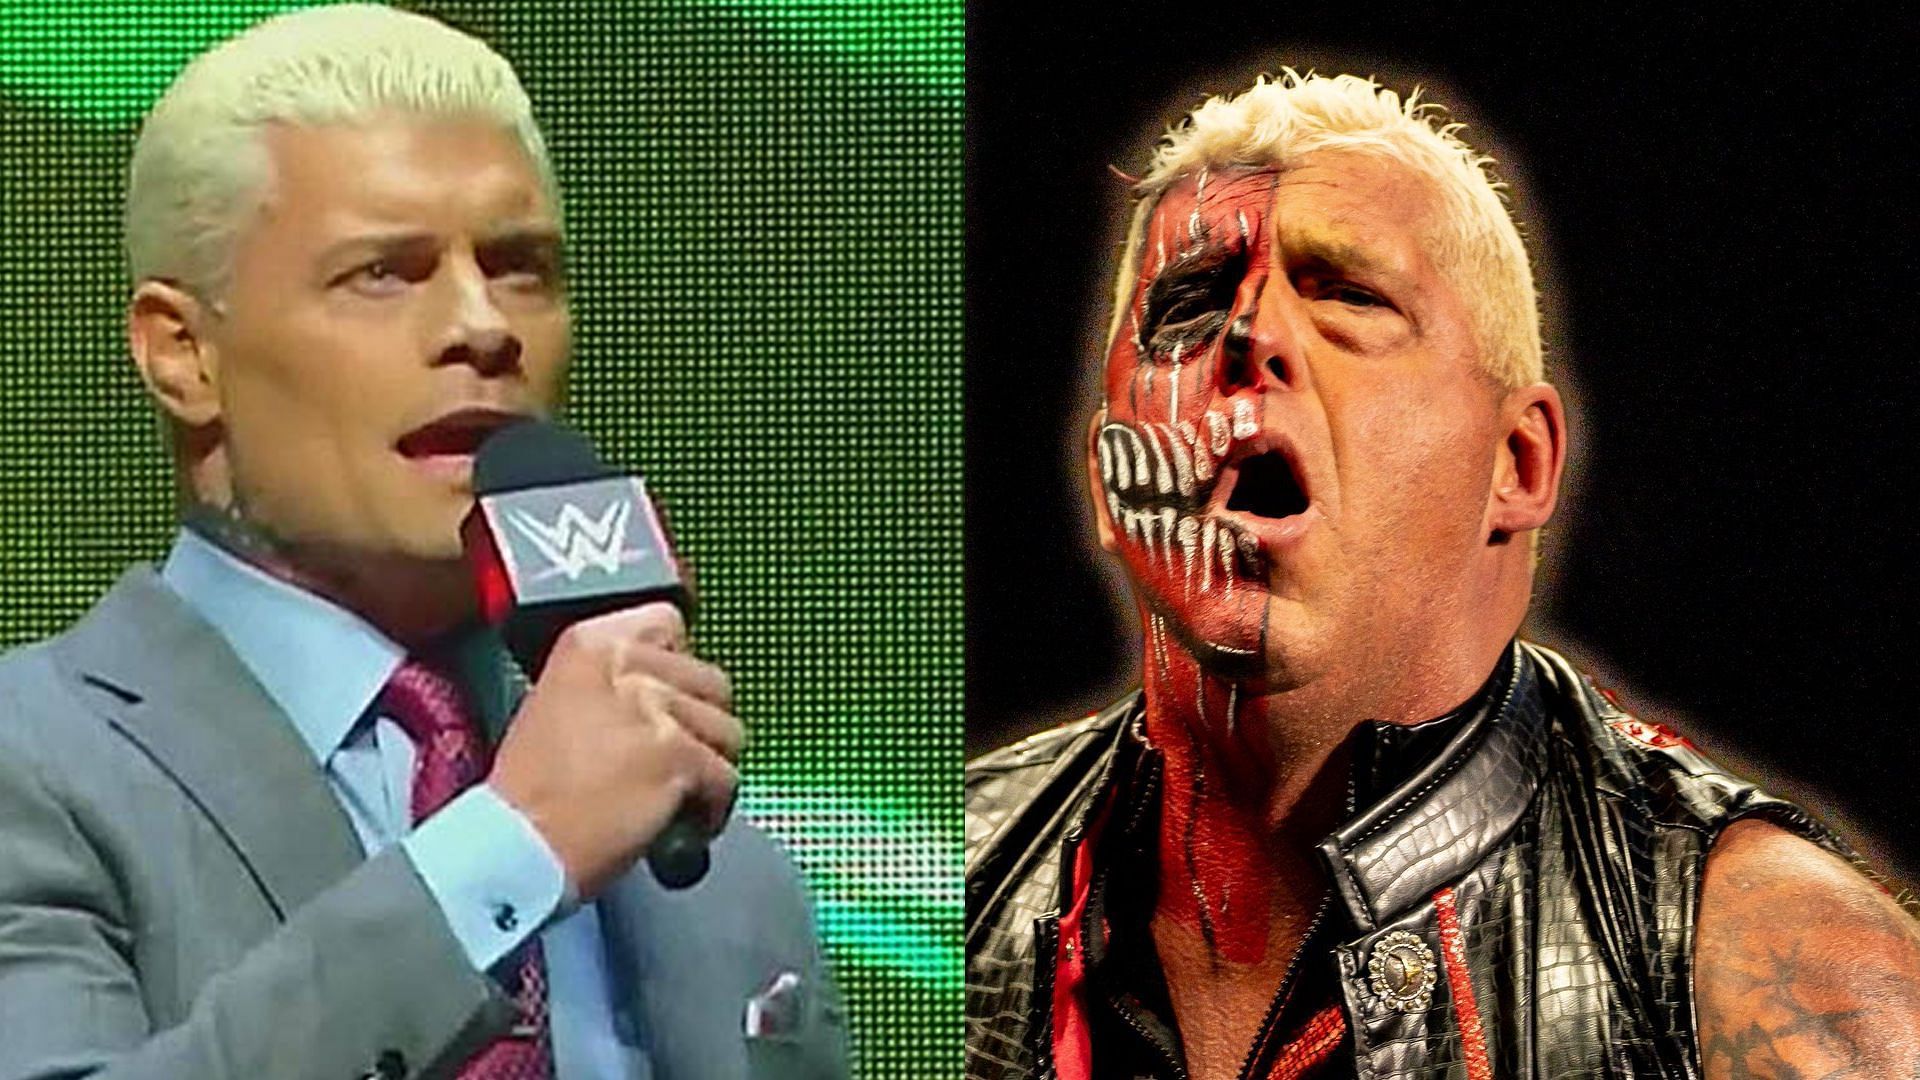 Cody and Dustin Rhodes are the sons of WWE Hall of Famer, Dusty Rhodes